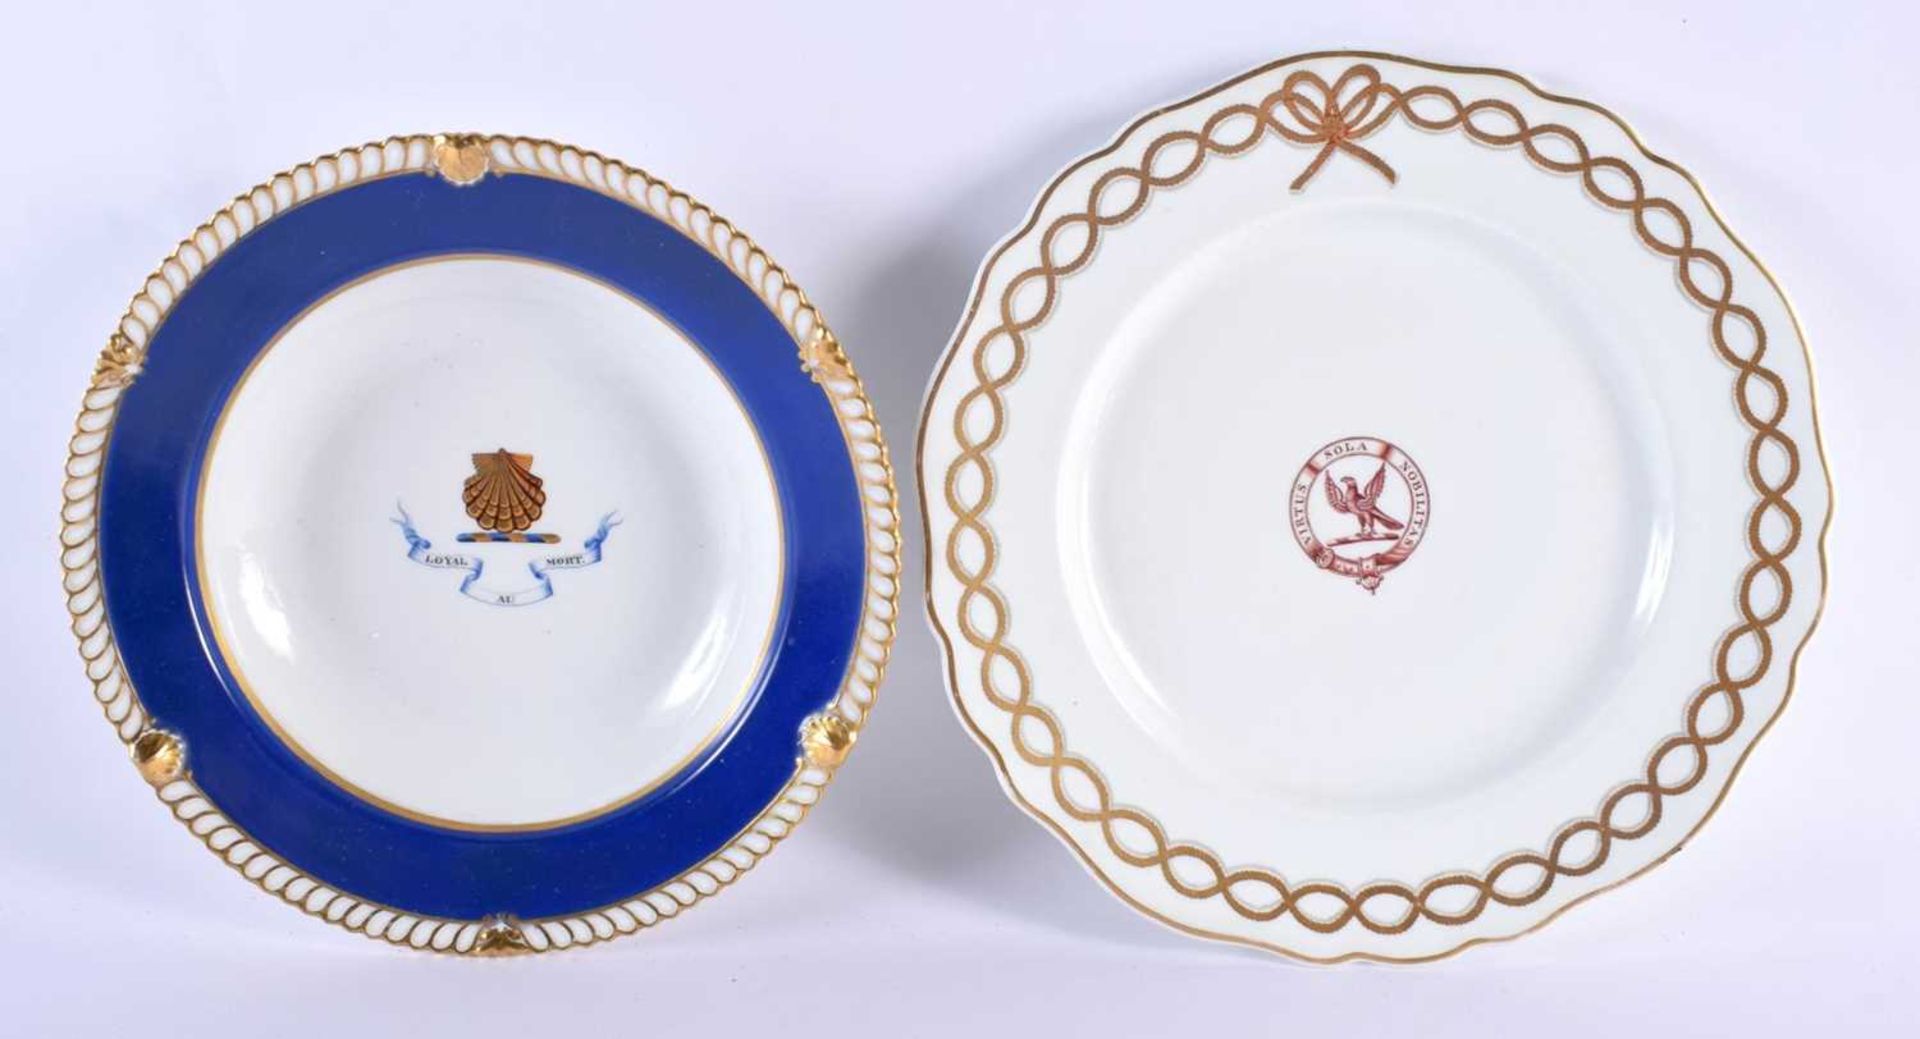 AN EARLY 19TH CENTURY CHAMBERLAINS WORCESTER ARMORIAL BOWL painted with a shell under a rich blue